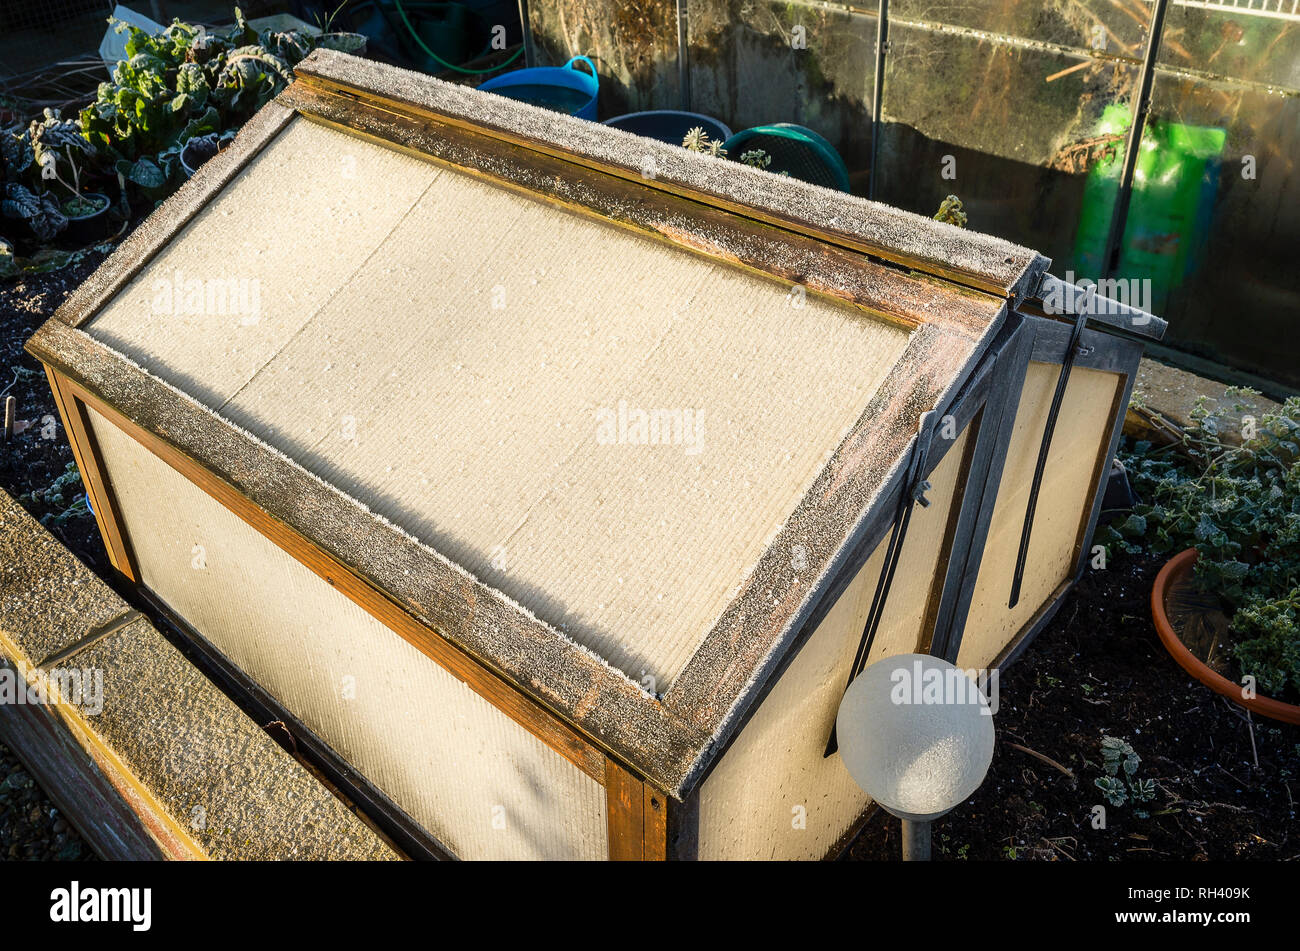 A frost-covered wooden cold frame on a raised bed protecting plants during January in an English garden Stock Photo